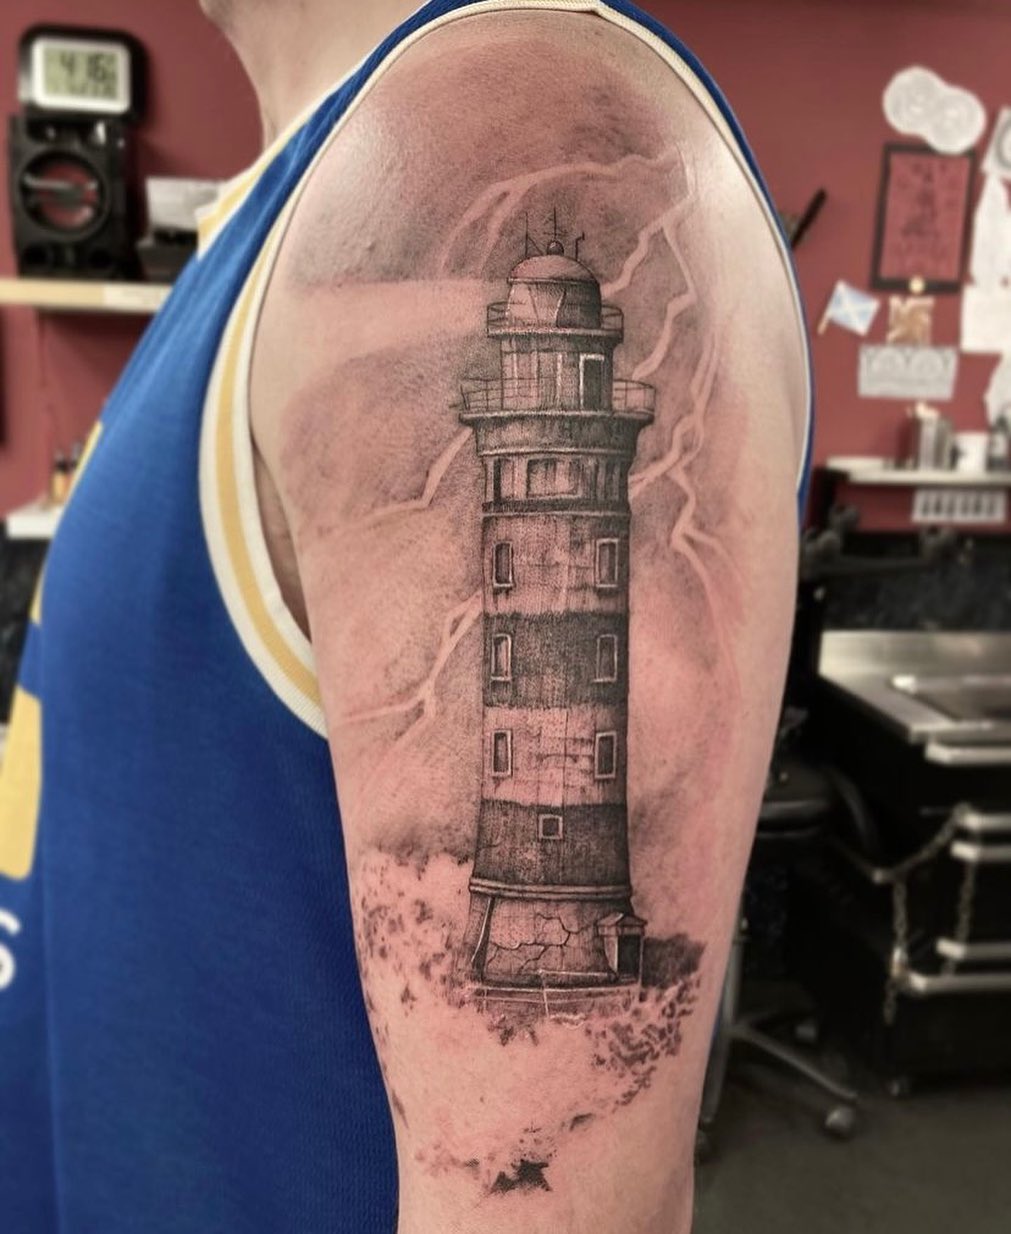 Some realism from our resident sungazerink 🔅

Karolis has some space this week! If you’d like to get some beautiful black and grey work, send him a message or fill out the tattoo enquiry form on our website ☺️ 

         